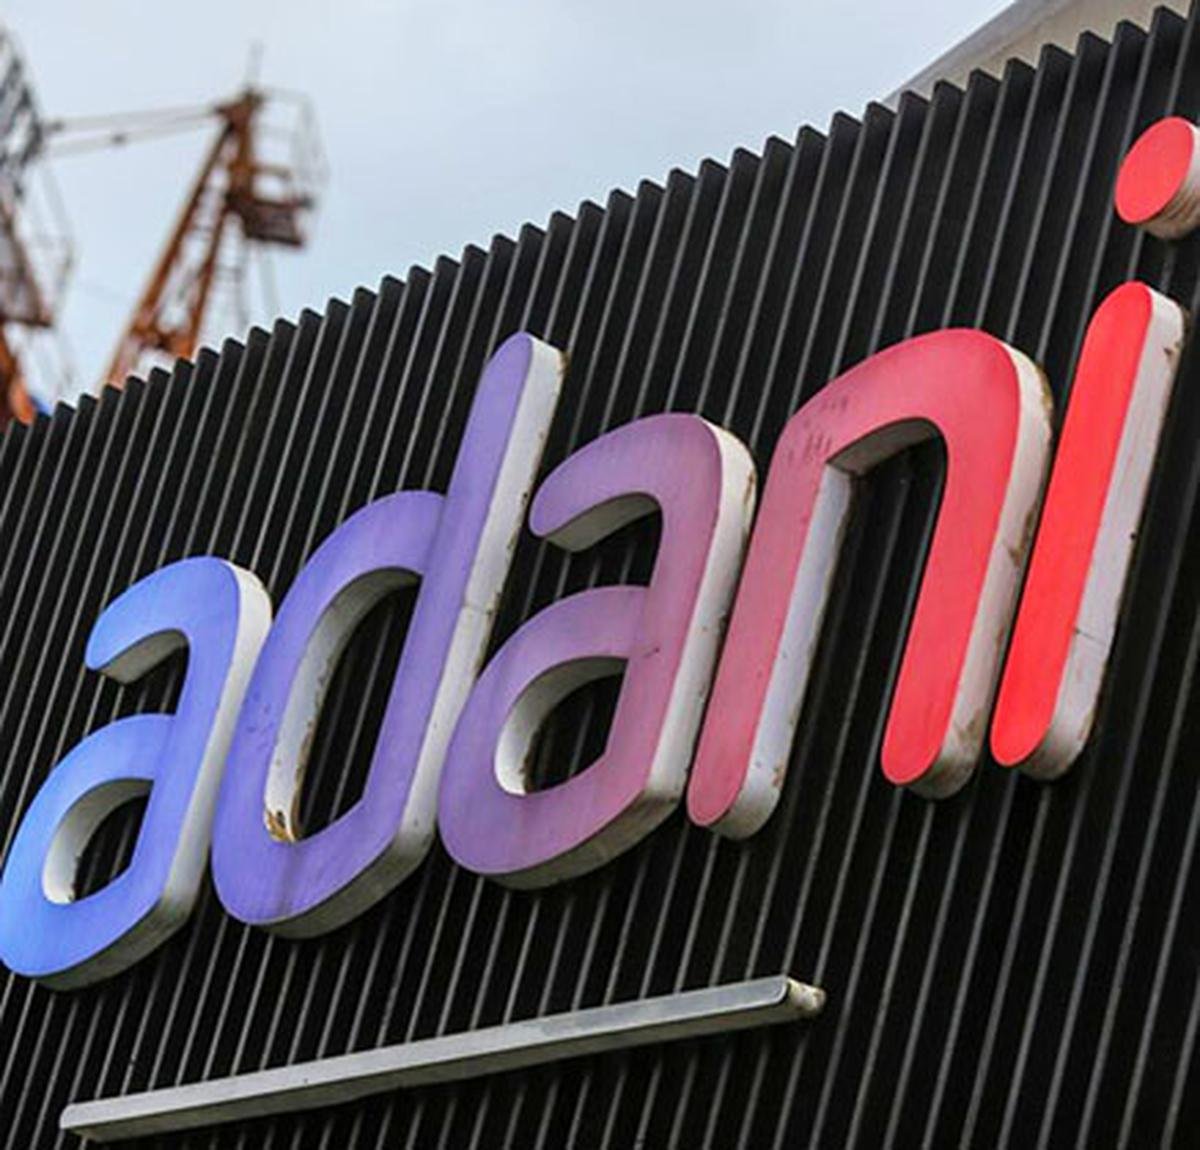 The Adani Group is now waiting for the State government to release a letter of intent (LoI), which will officially confirm that the company has clinched the global bid to redevelop Dharavi.